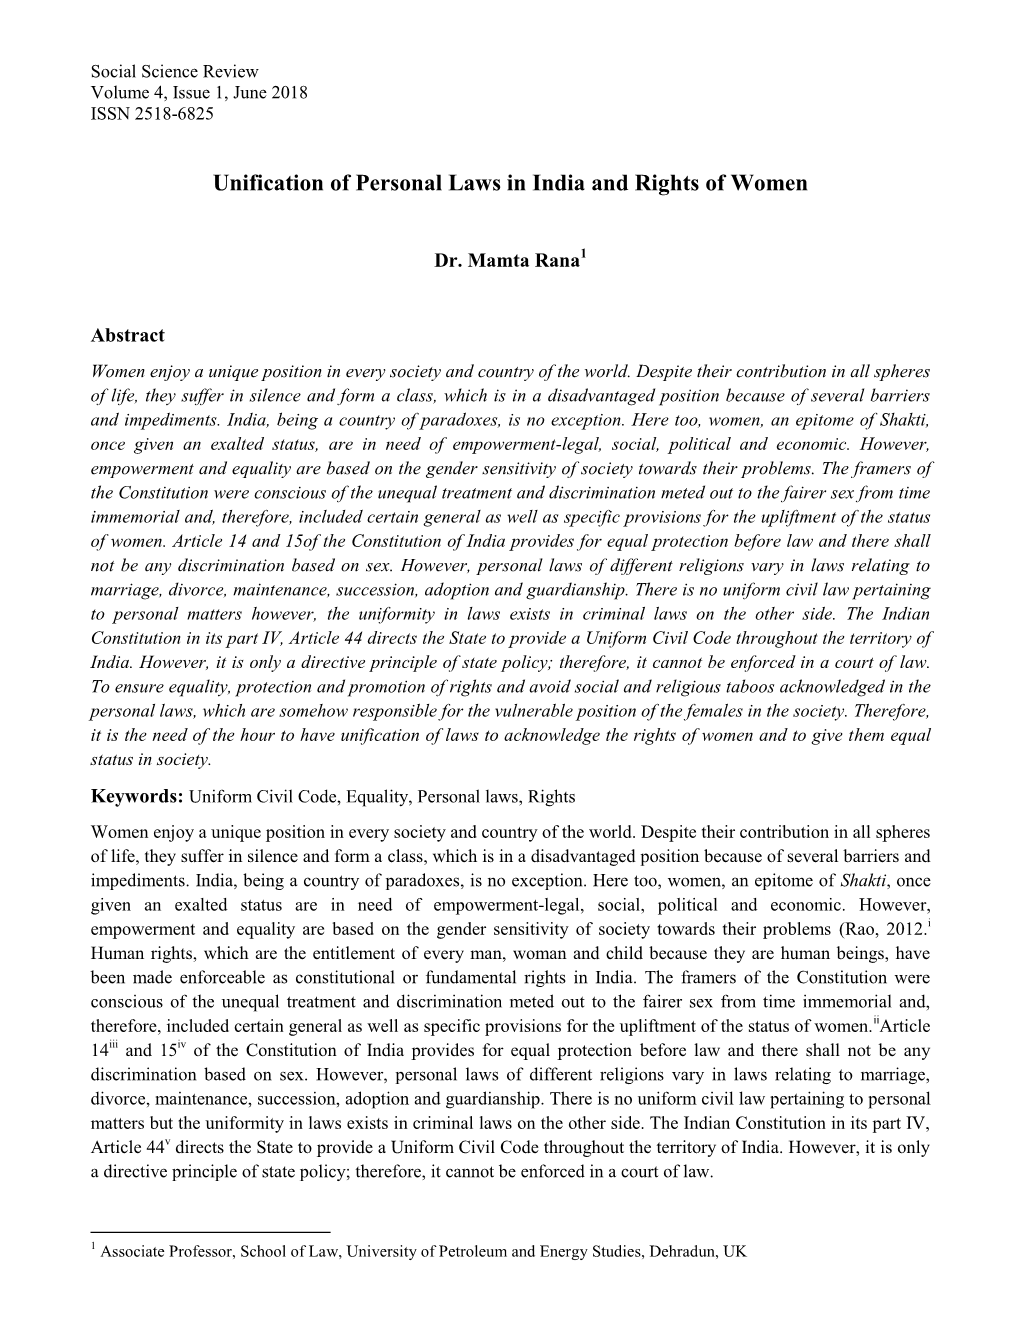 Unification of Personal Laws in India and Rights of Women